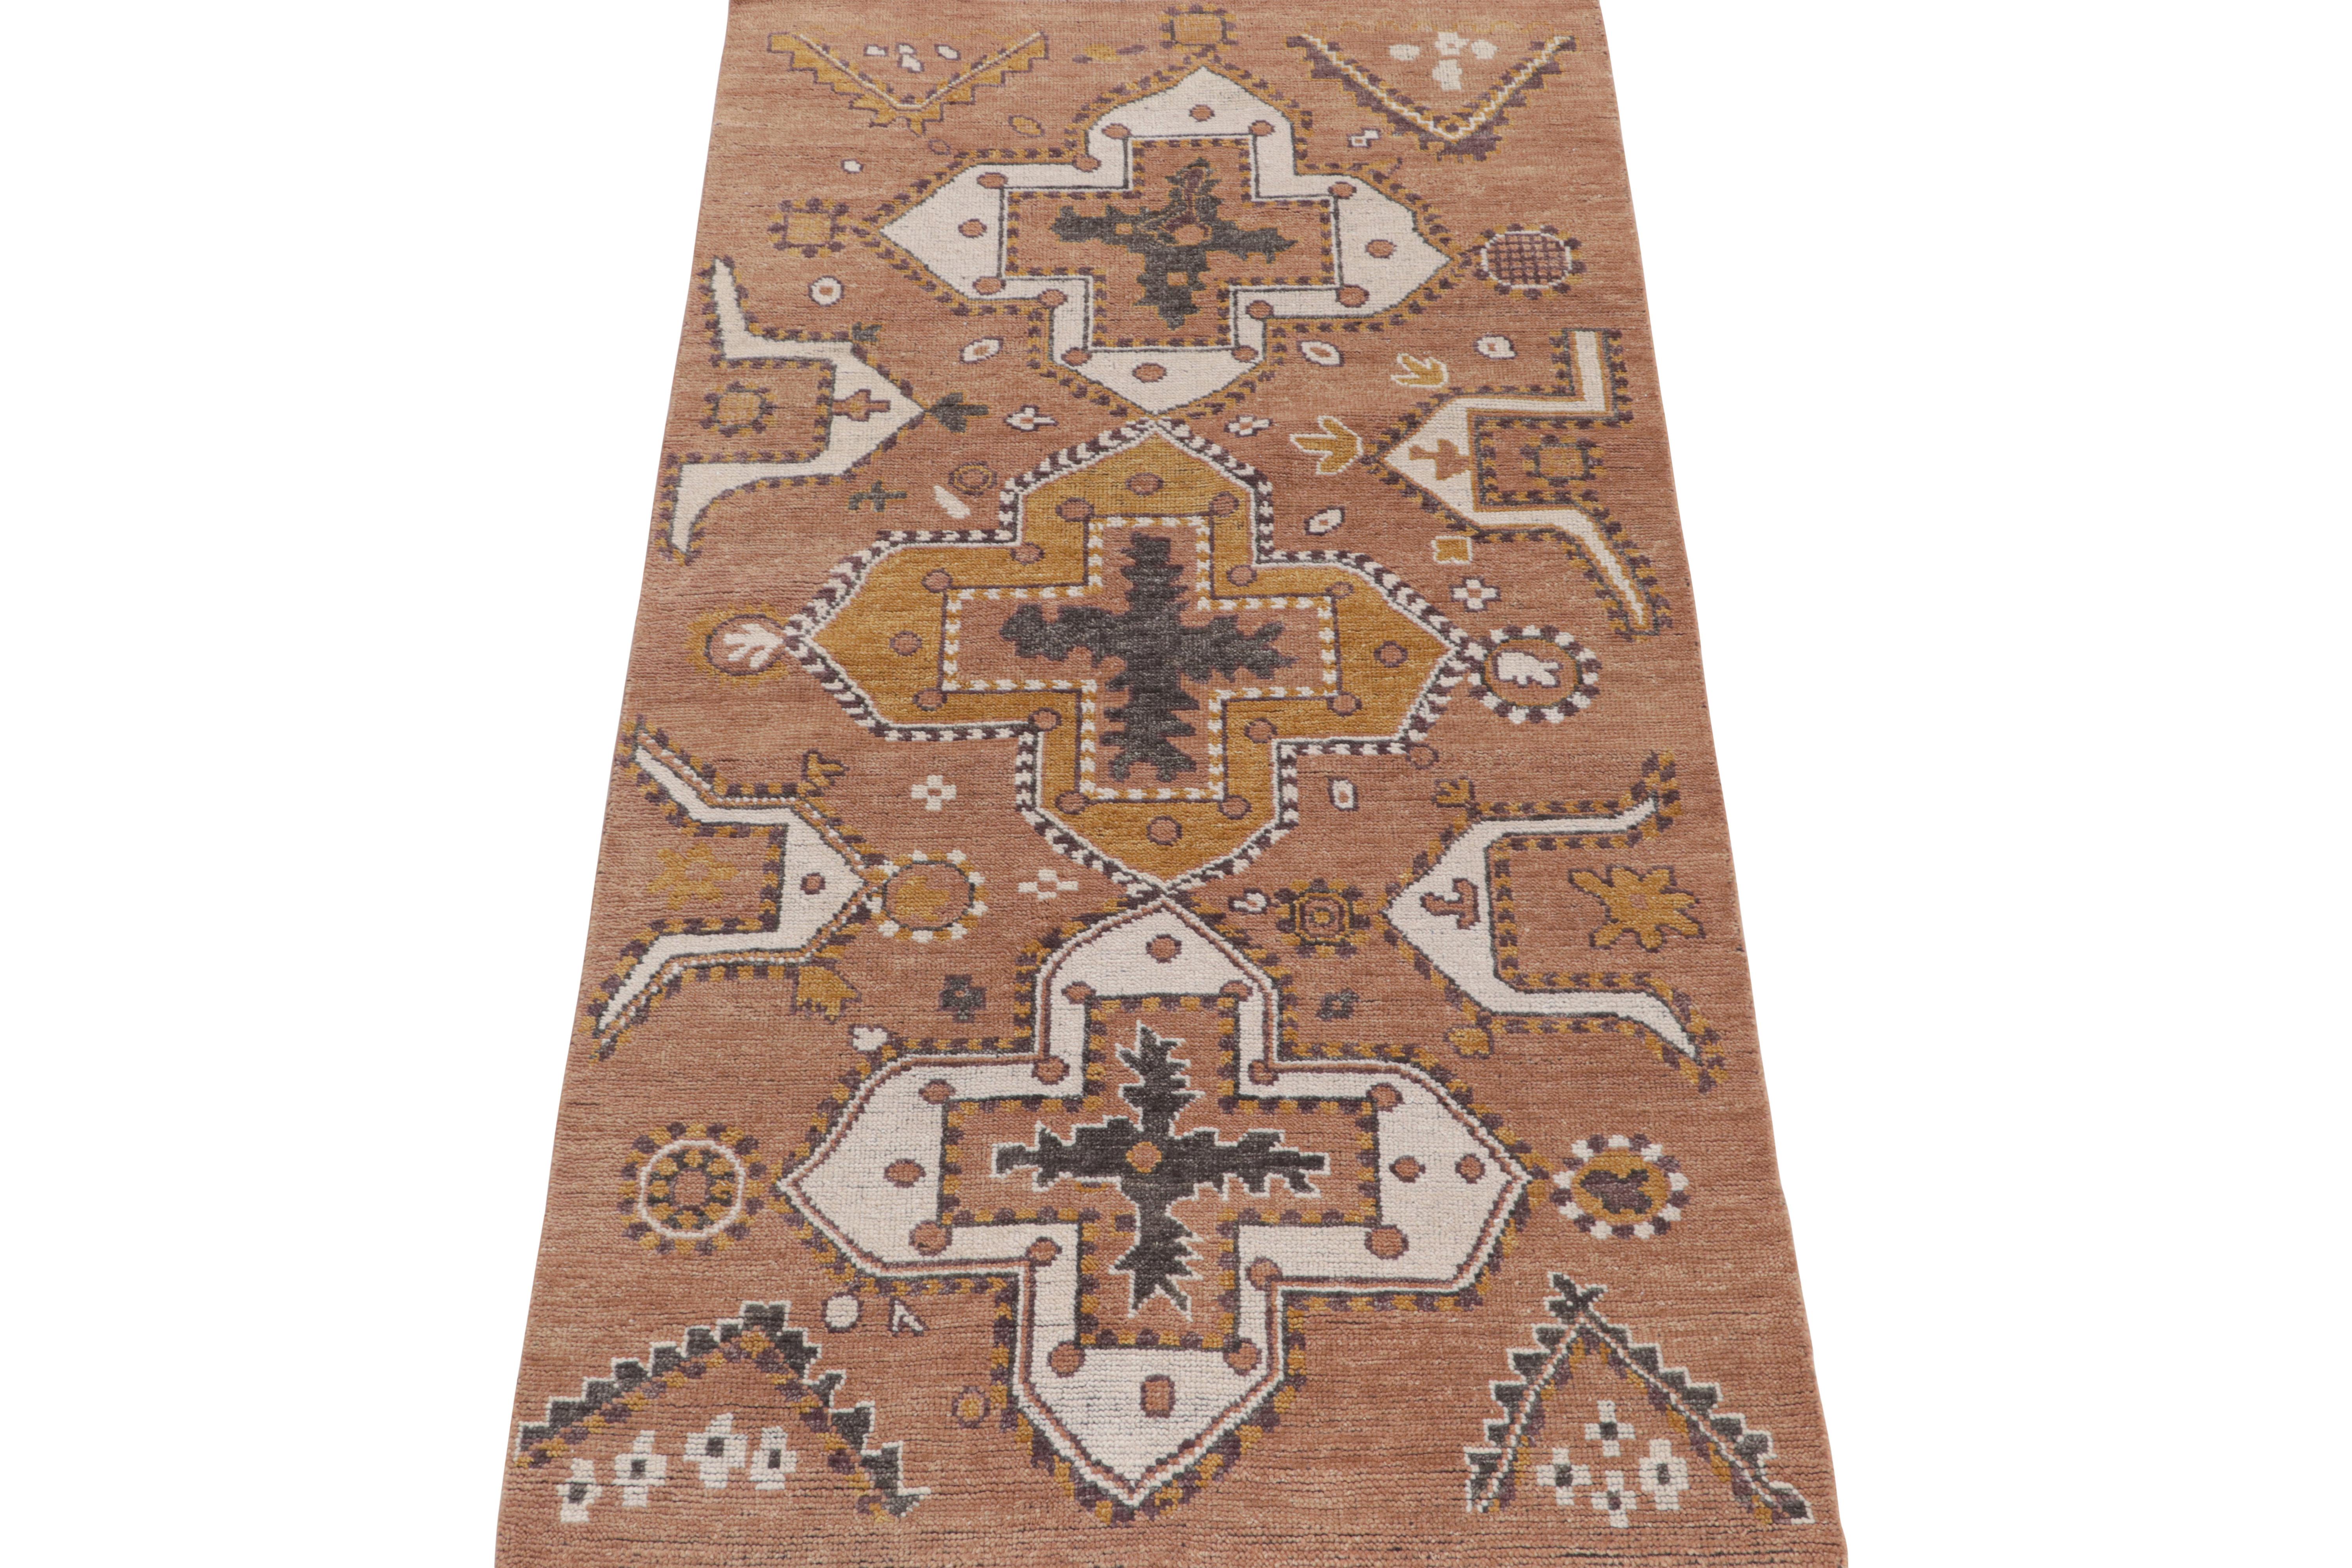 Indian Rug & Kilim’s Tribal Style Rug in Rust with Gold and White Medallion Patterns For Sale